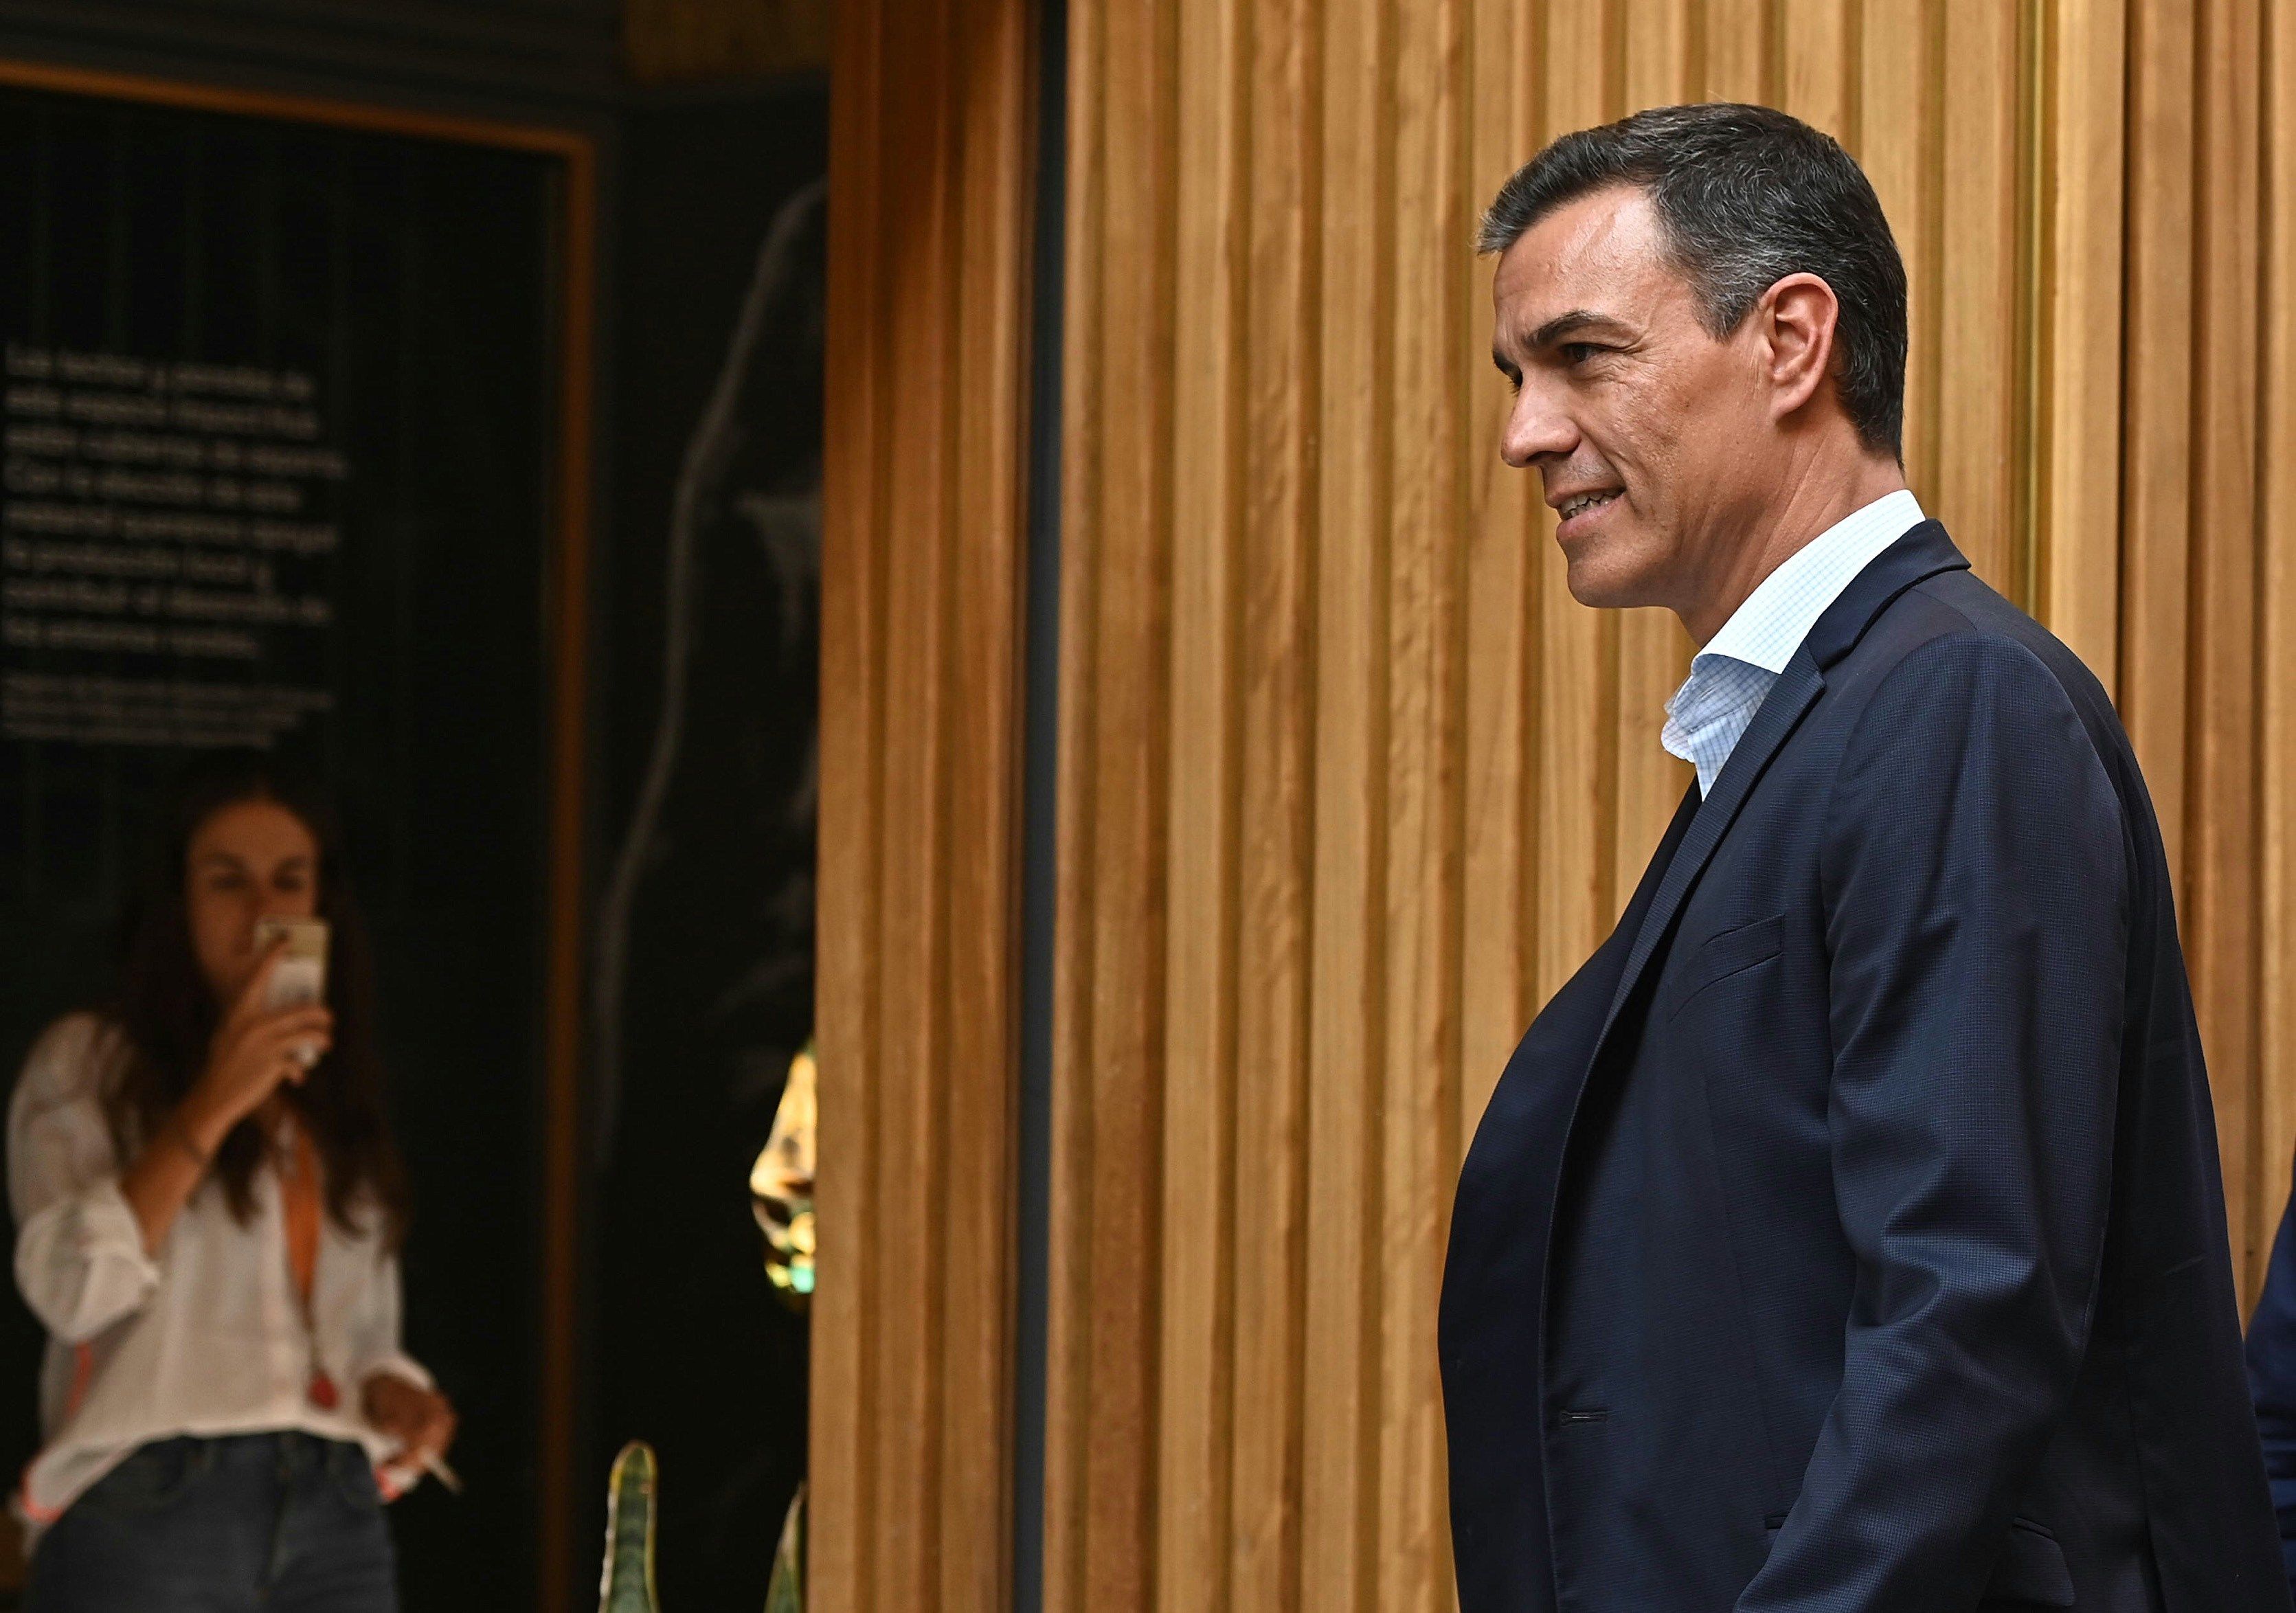 Sánchez to offer 300-point plan to try to win Podemos' support